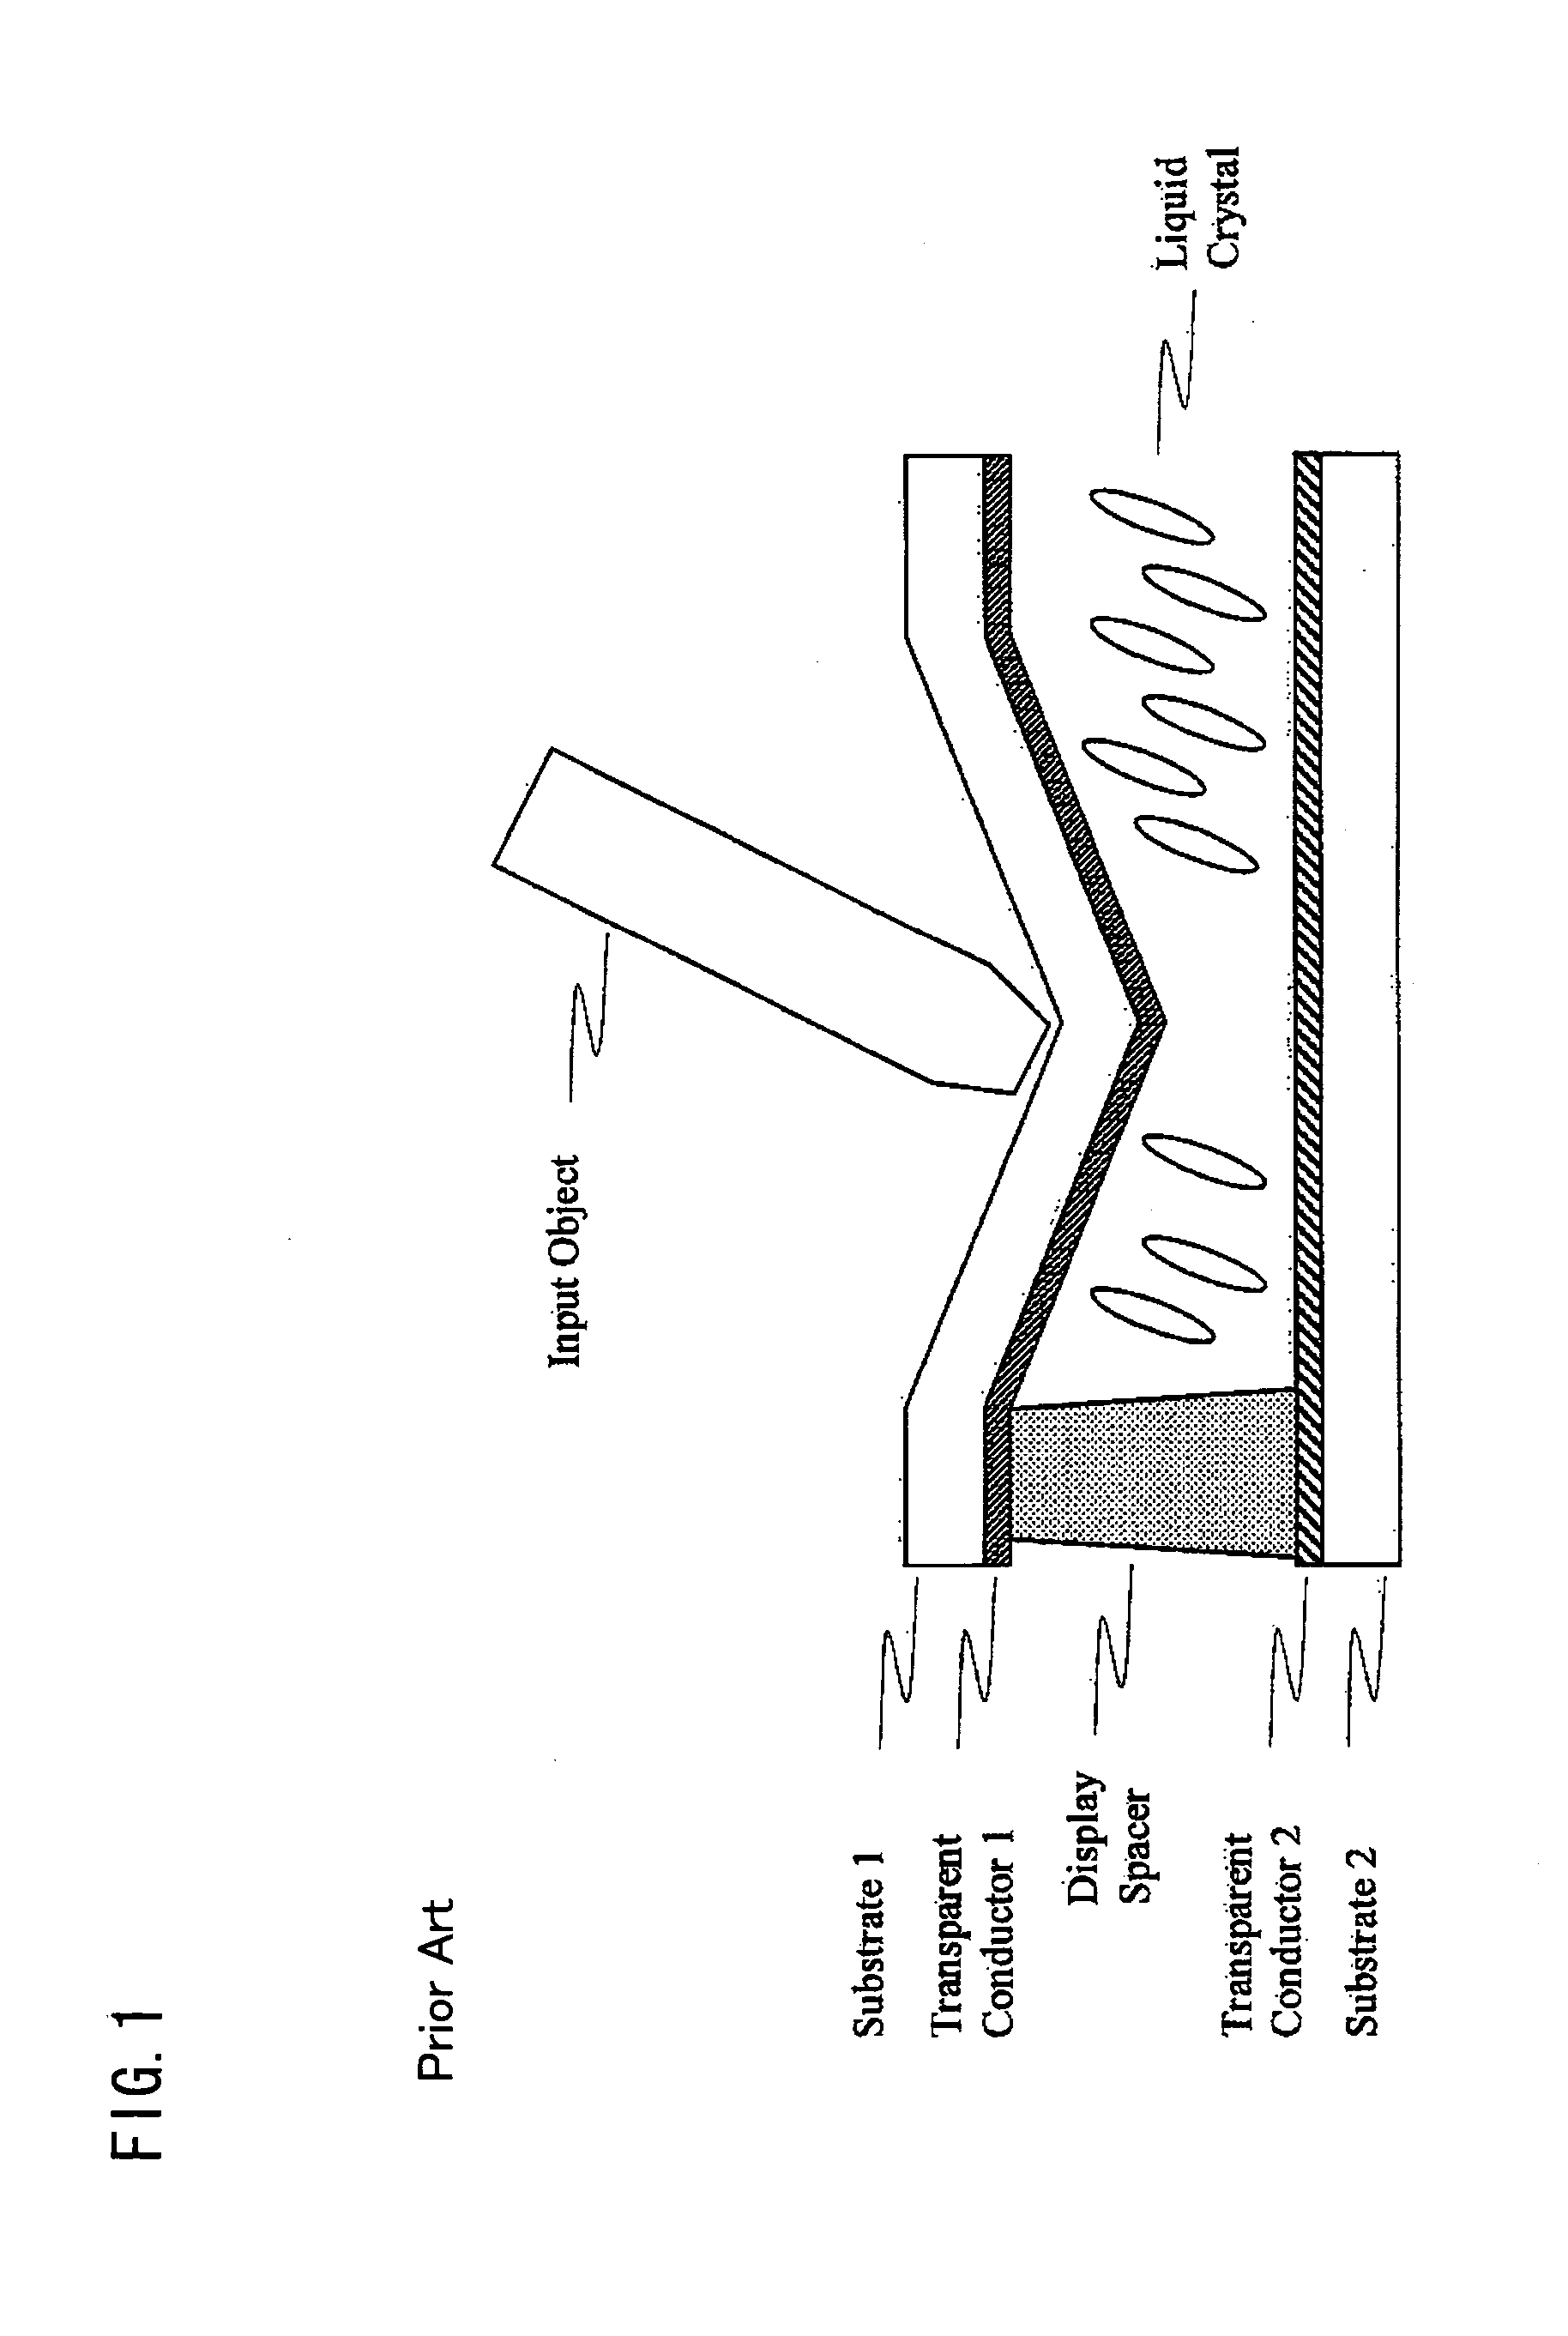 Liquid crystal device comprising array of sensor circuits using a pre-charge operation